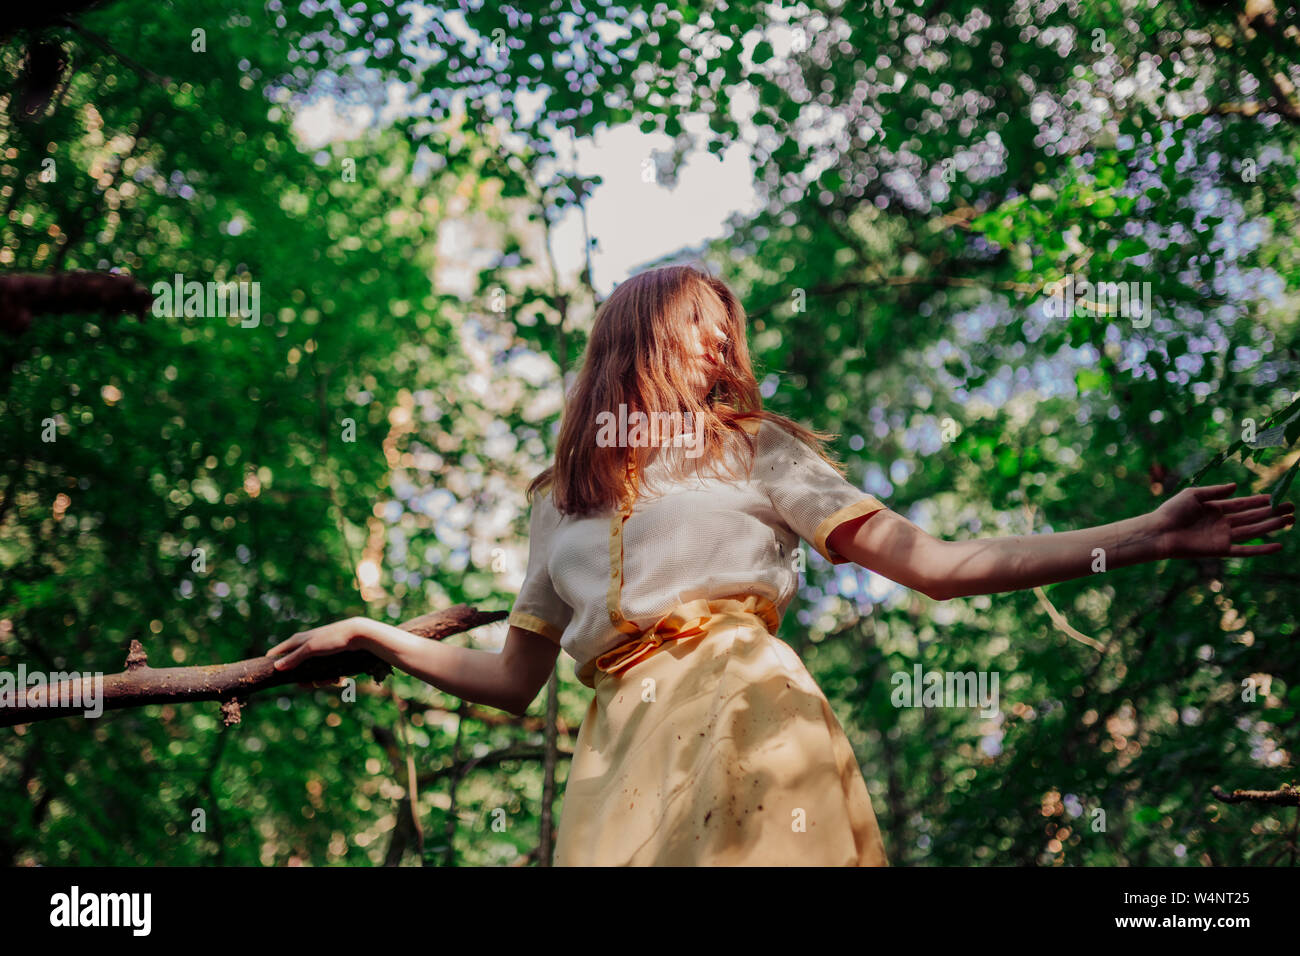 woman standing on a tree in a yellow dress Stock Photo